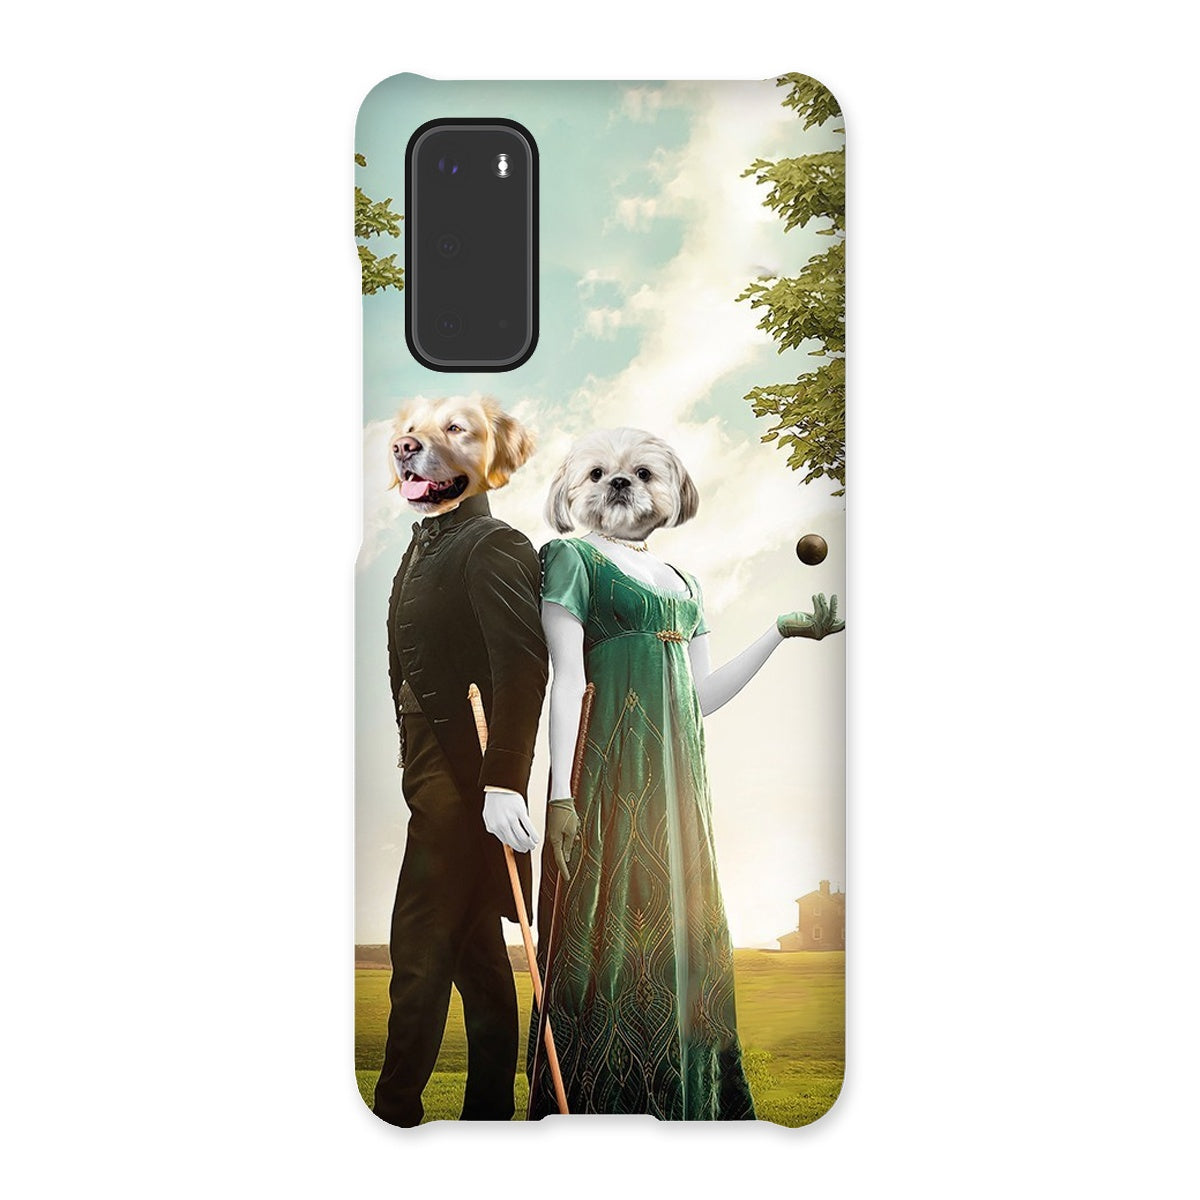 Kate & Anthony (Bridgerton Inspired): Custom Pet Phone Case, Paw & Glory, paw and glory, funny pet picture, pawtraits, dog in suit painting, paintings of my dog Wall Art: renaissance pet portraits uk, dog painted portraits,